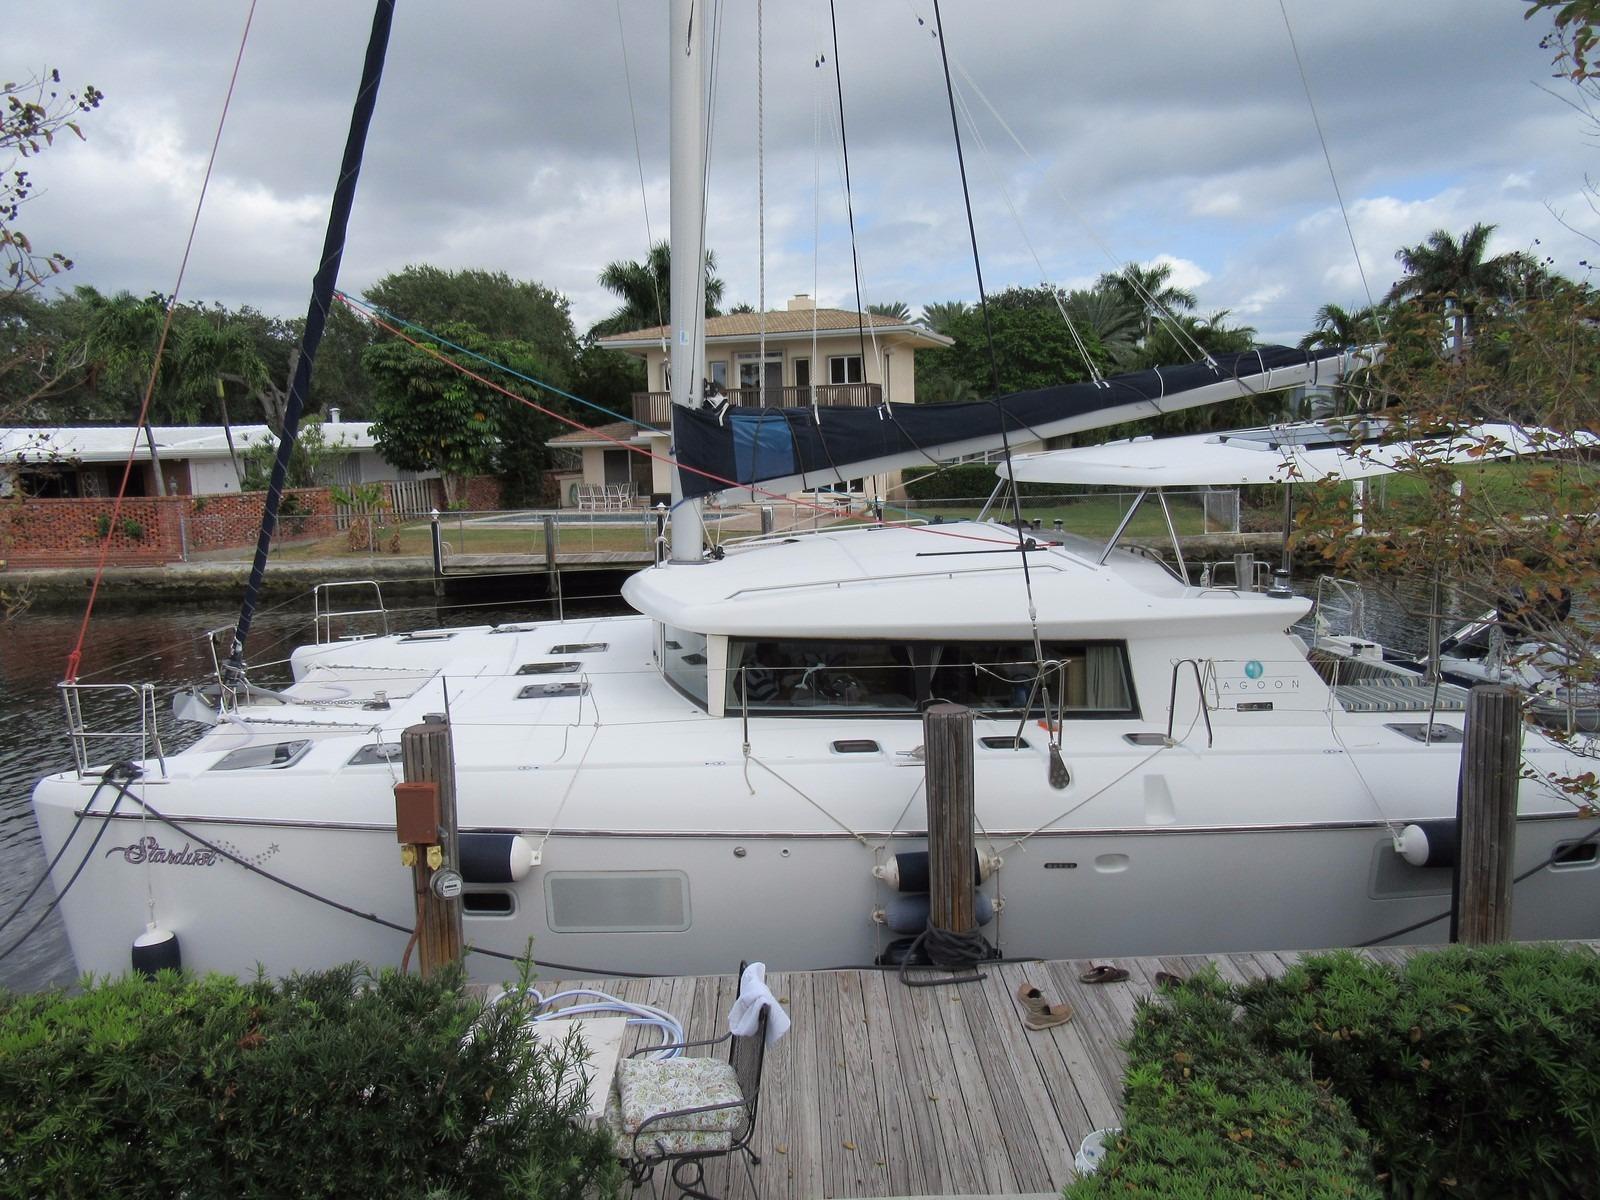 Catamarans For Sale - All Used Catamarans For Sale